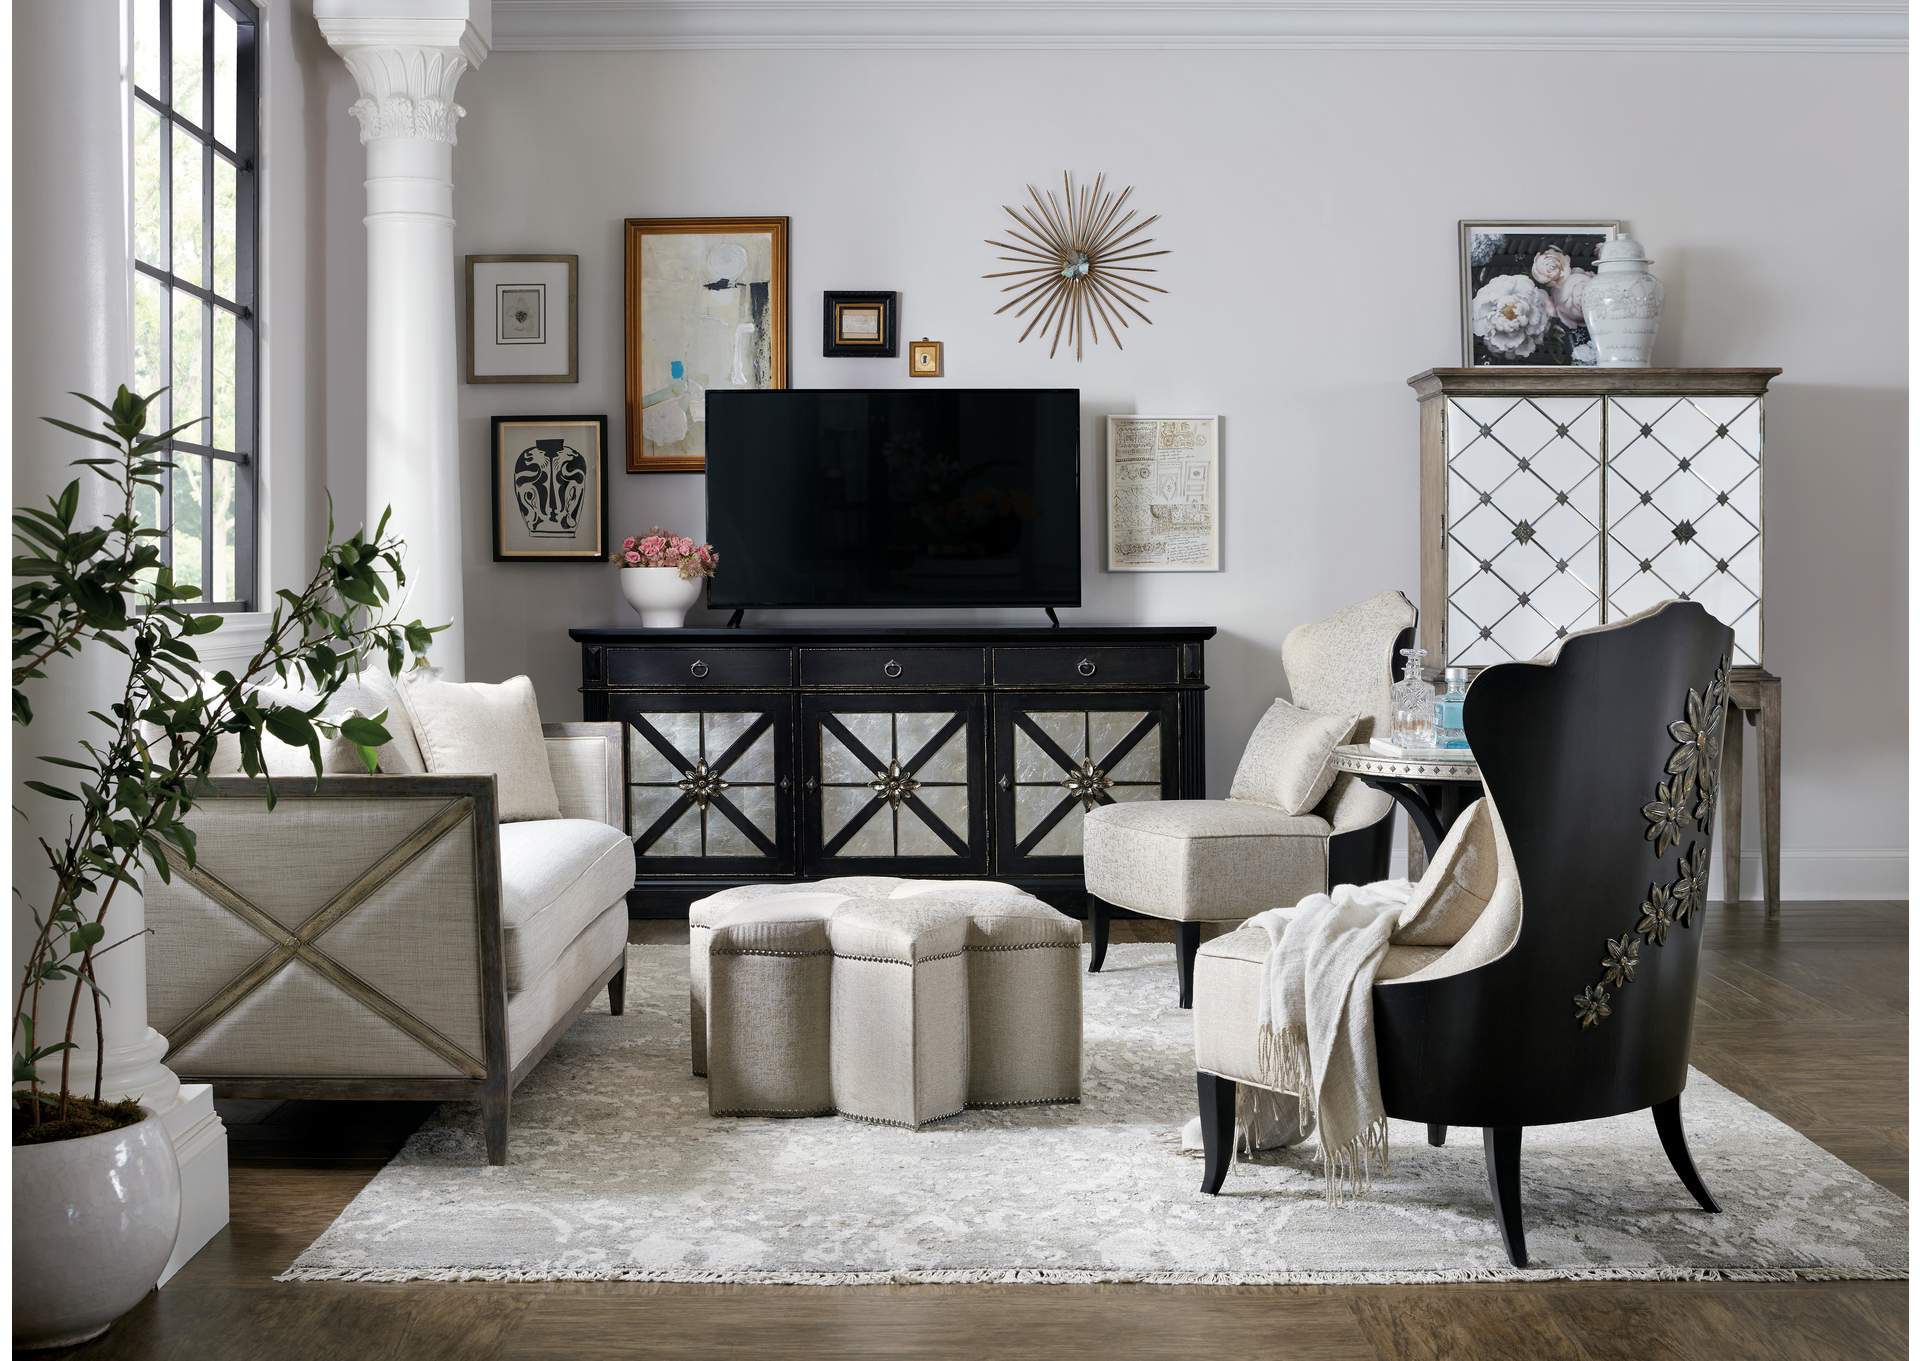 Sanctuary Star of The Show Ottoman,Hooker Furniture